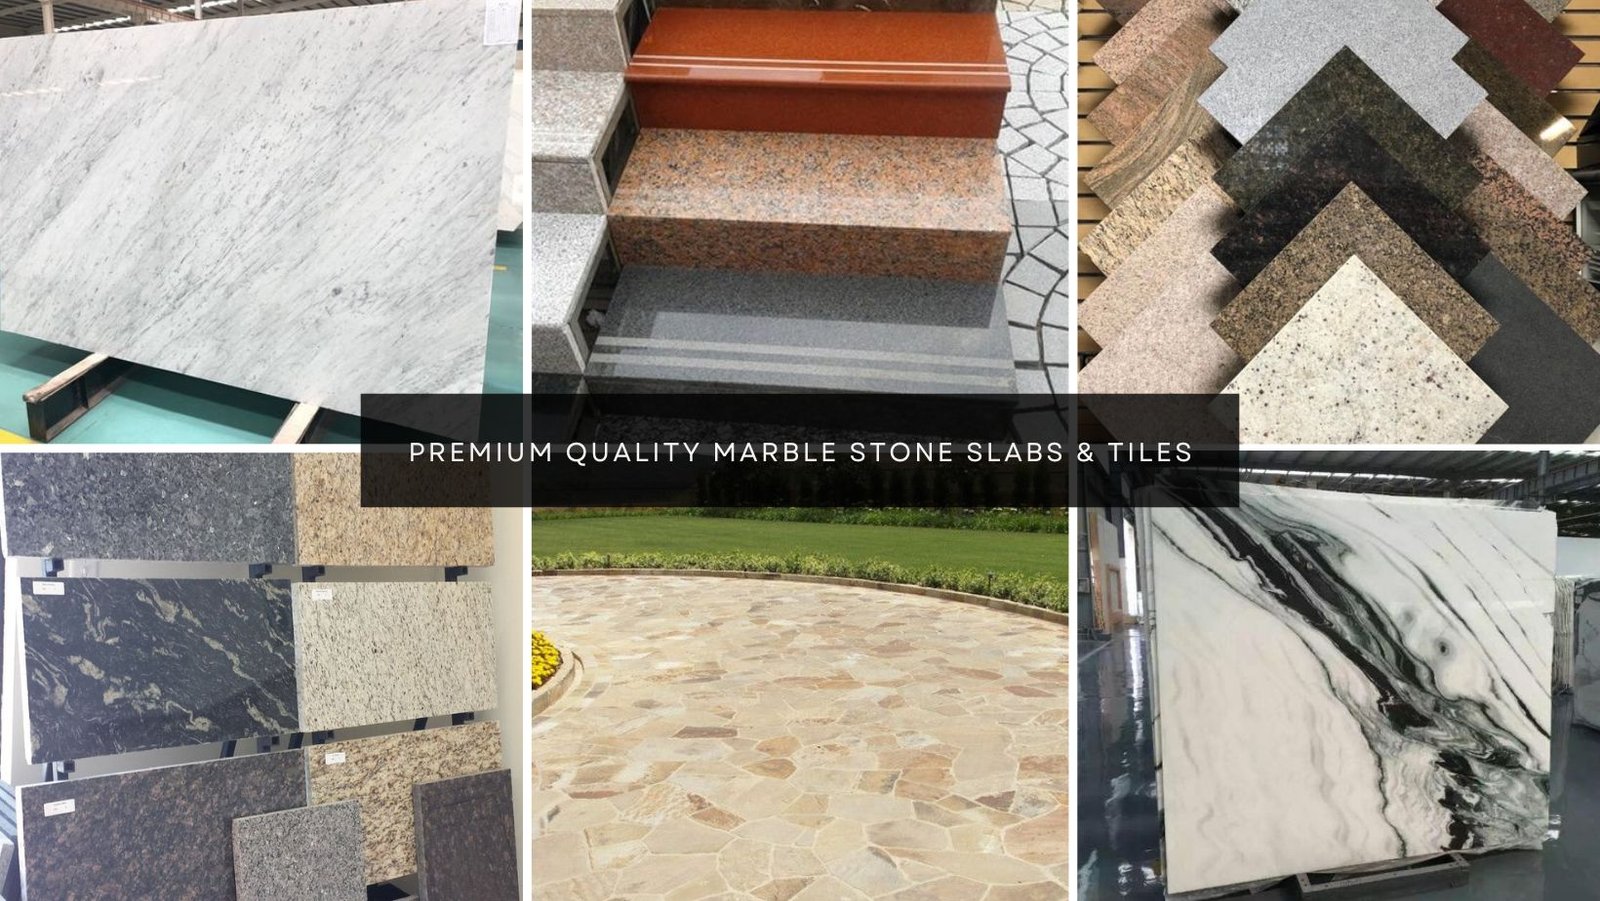 You are currently viewing Premium Quality Marble Stone Slabs & Tiles